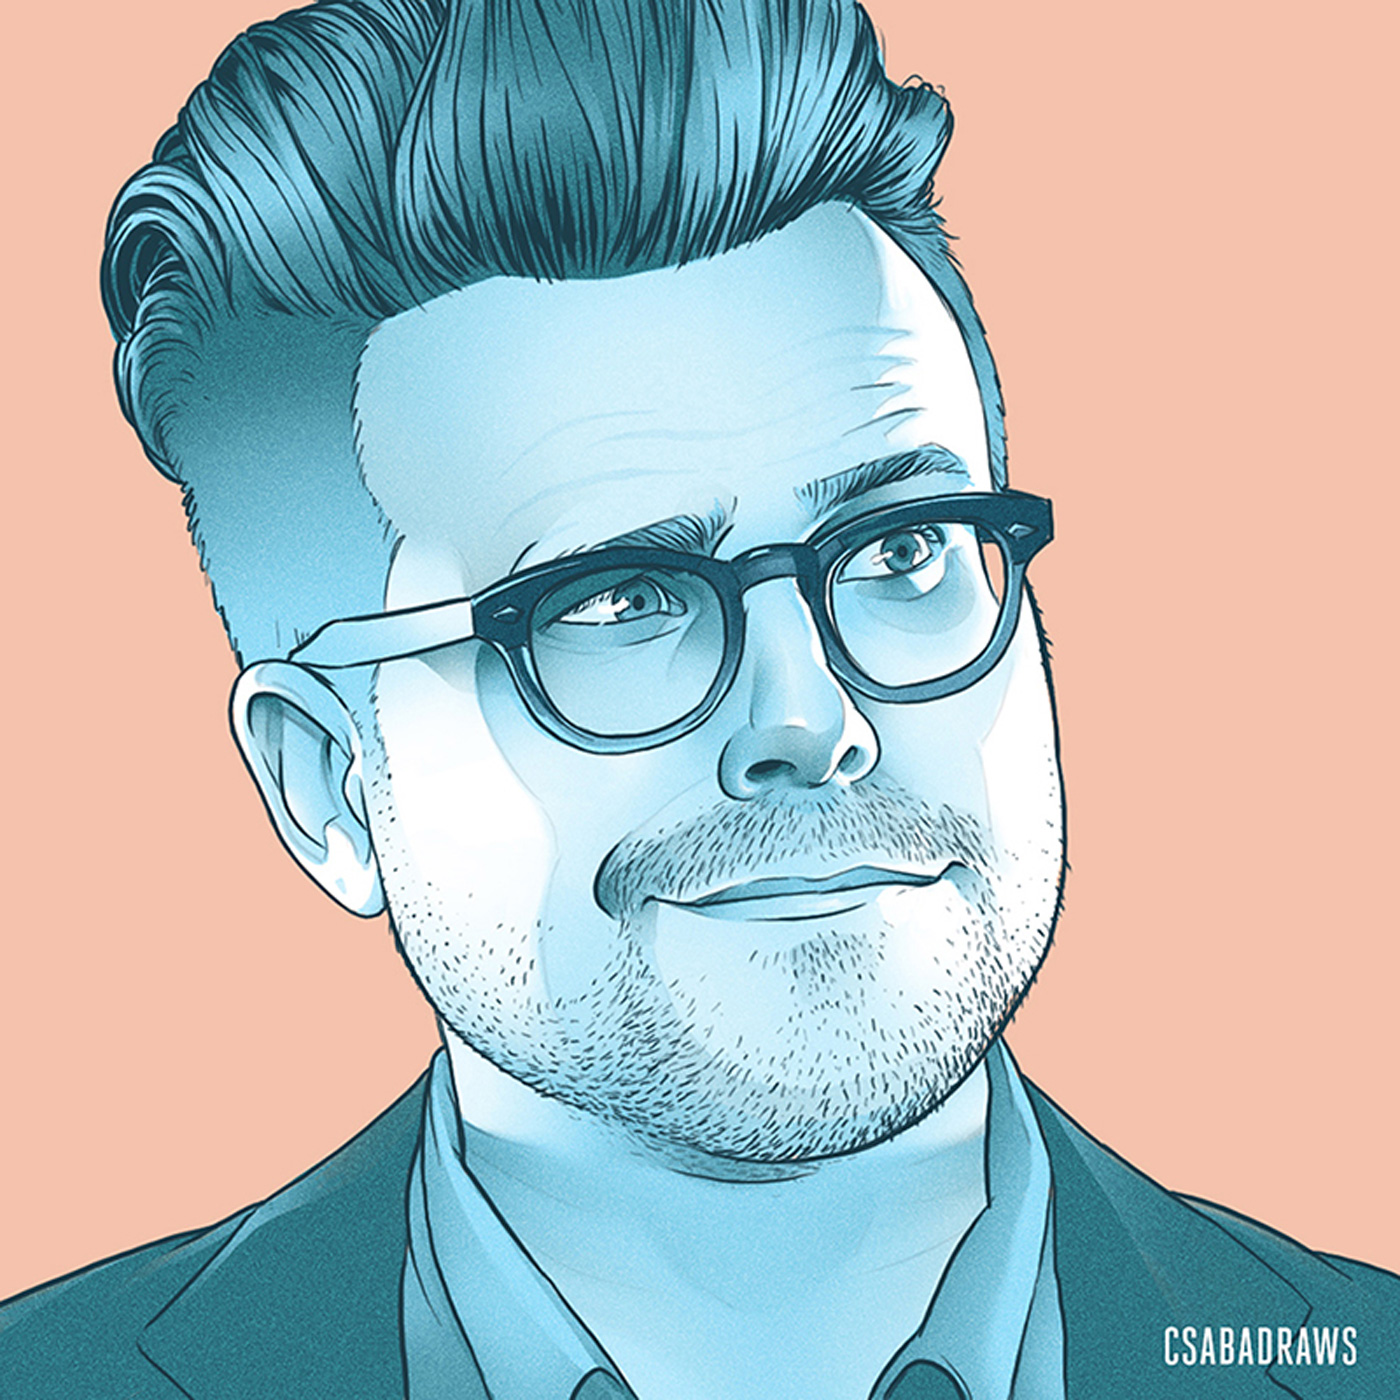 Drawing of a Guy With Spectacles and Trimmed Beard